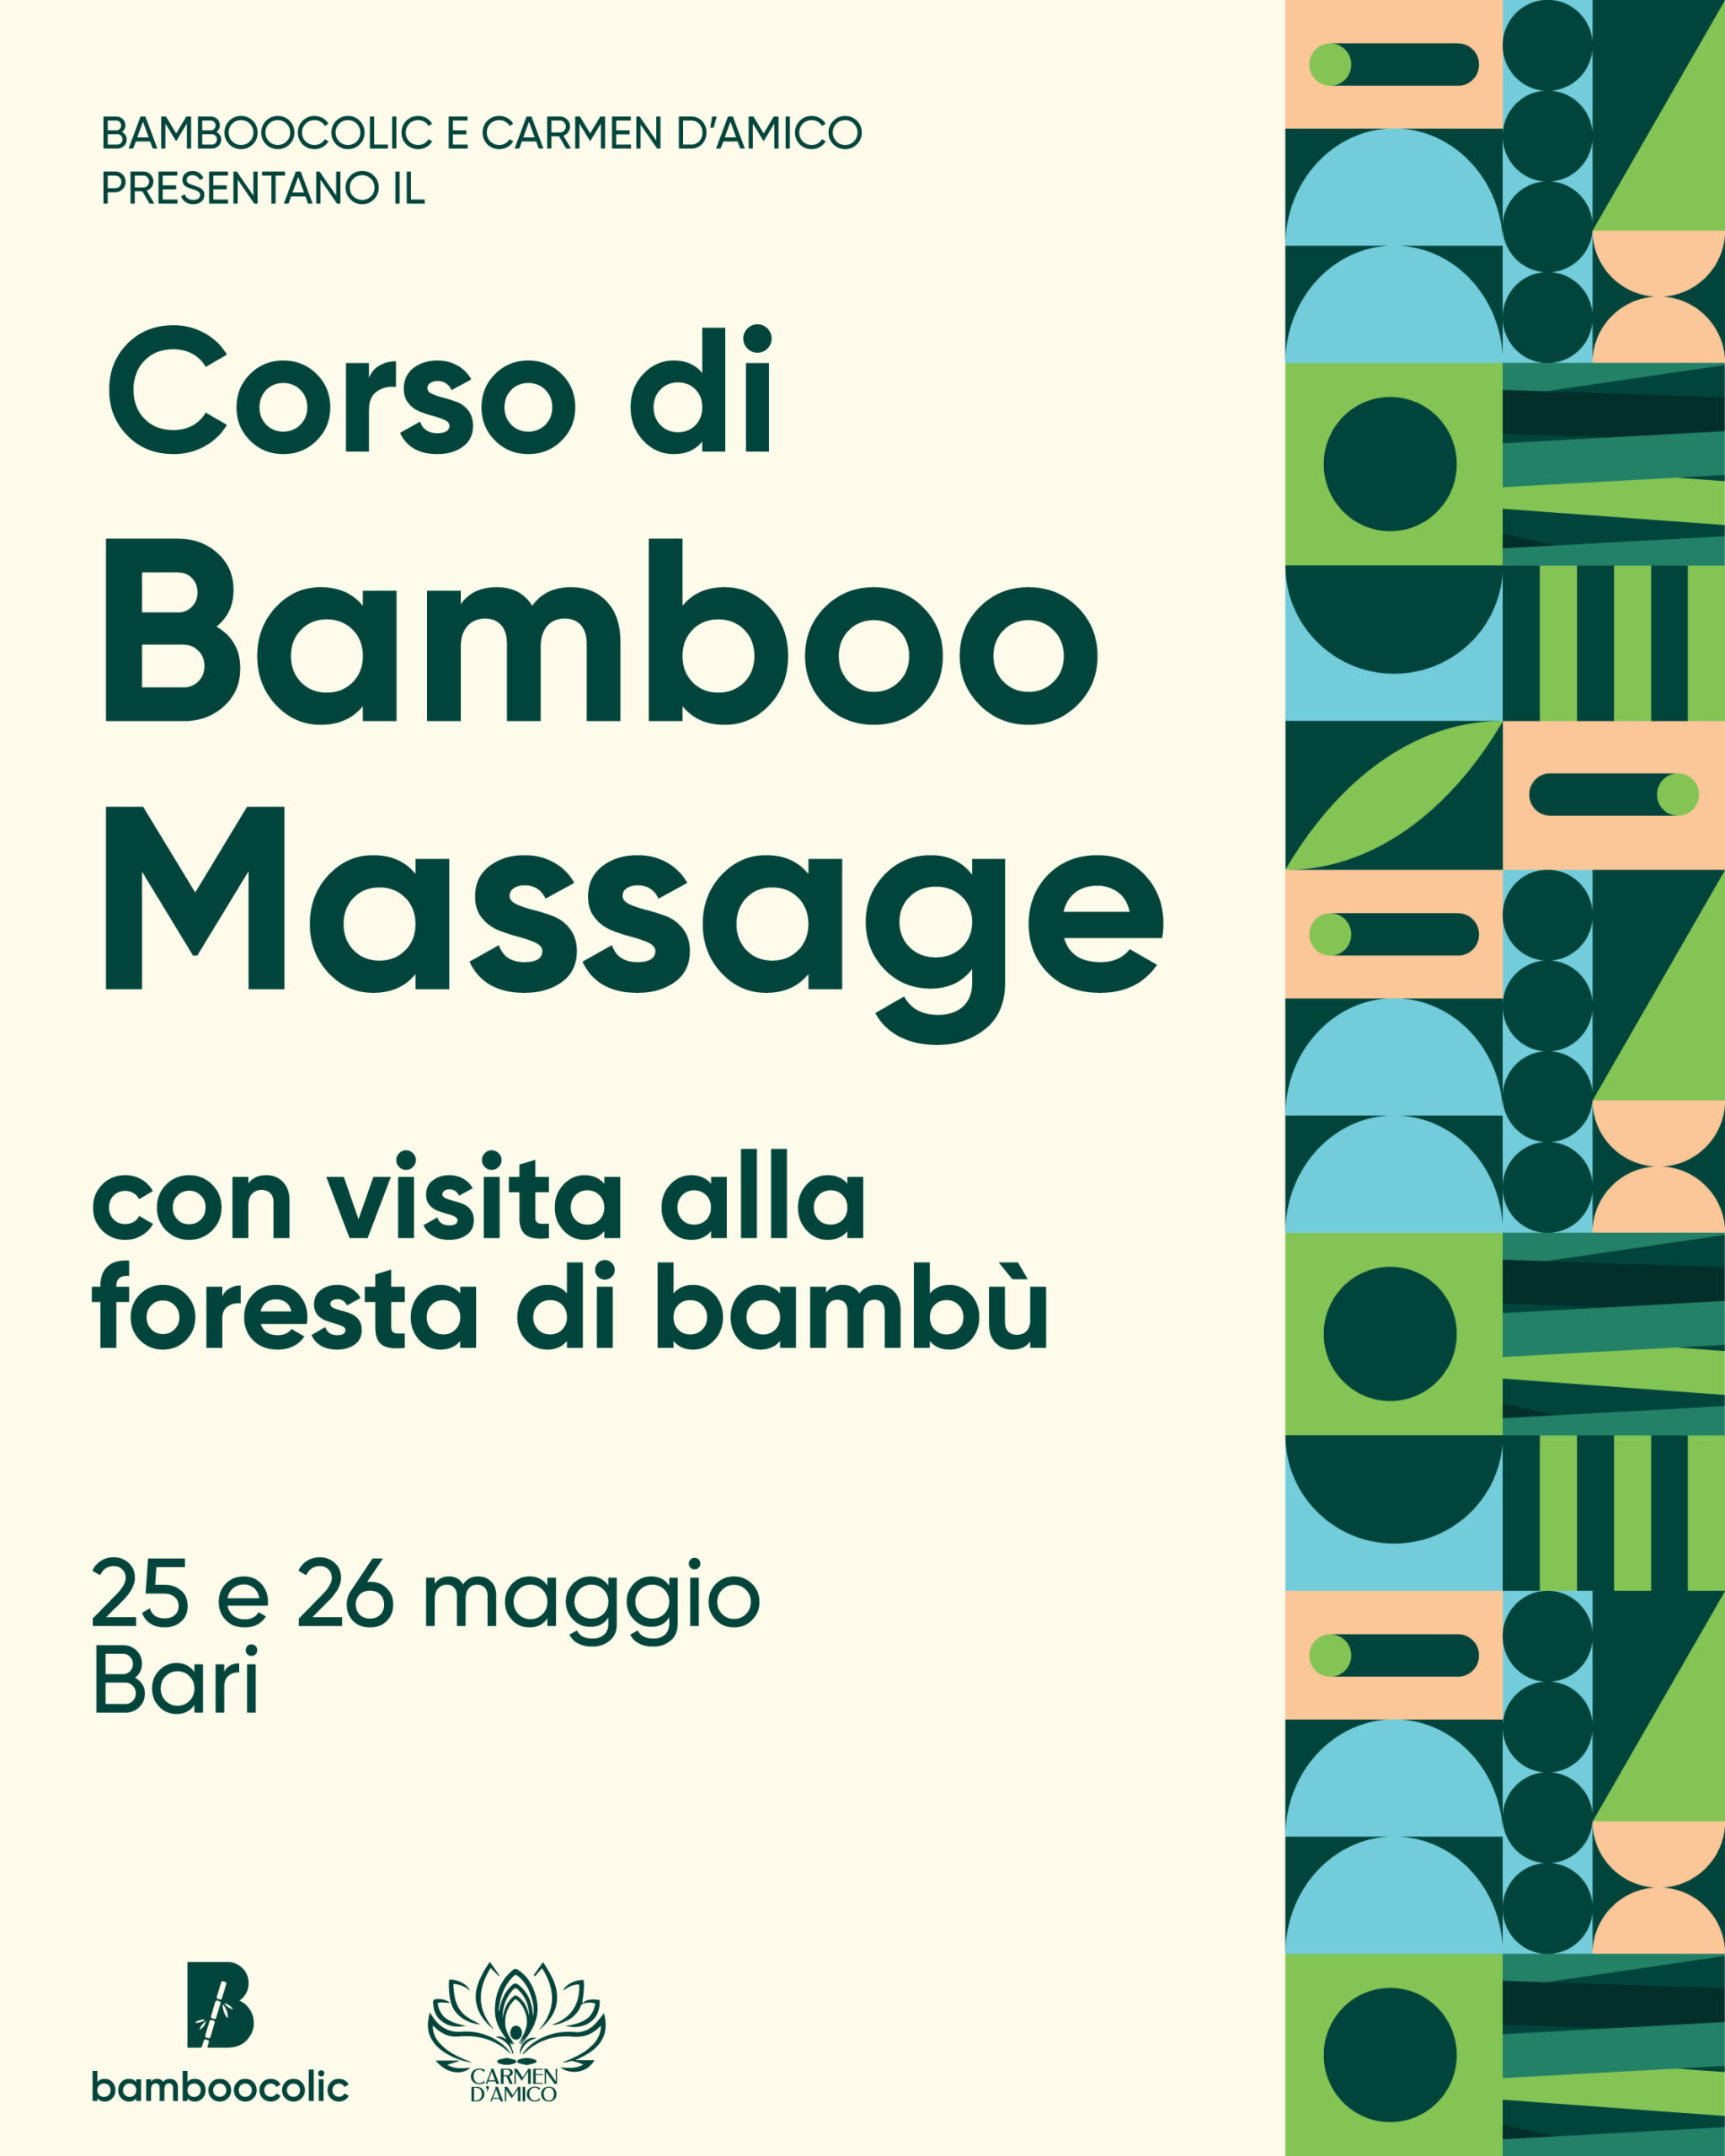 Bamboo Massage course with visit to the Bambuse grove by Bamboocolic and Carmen D'Amico